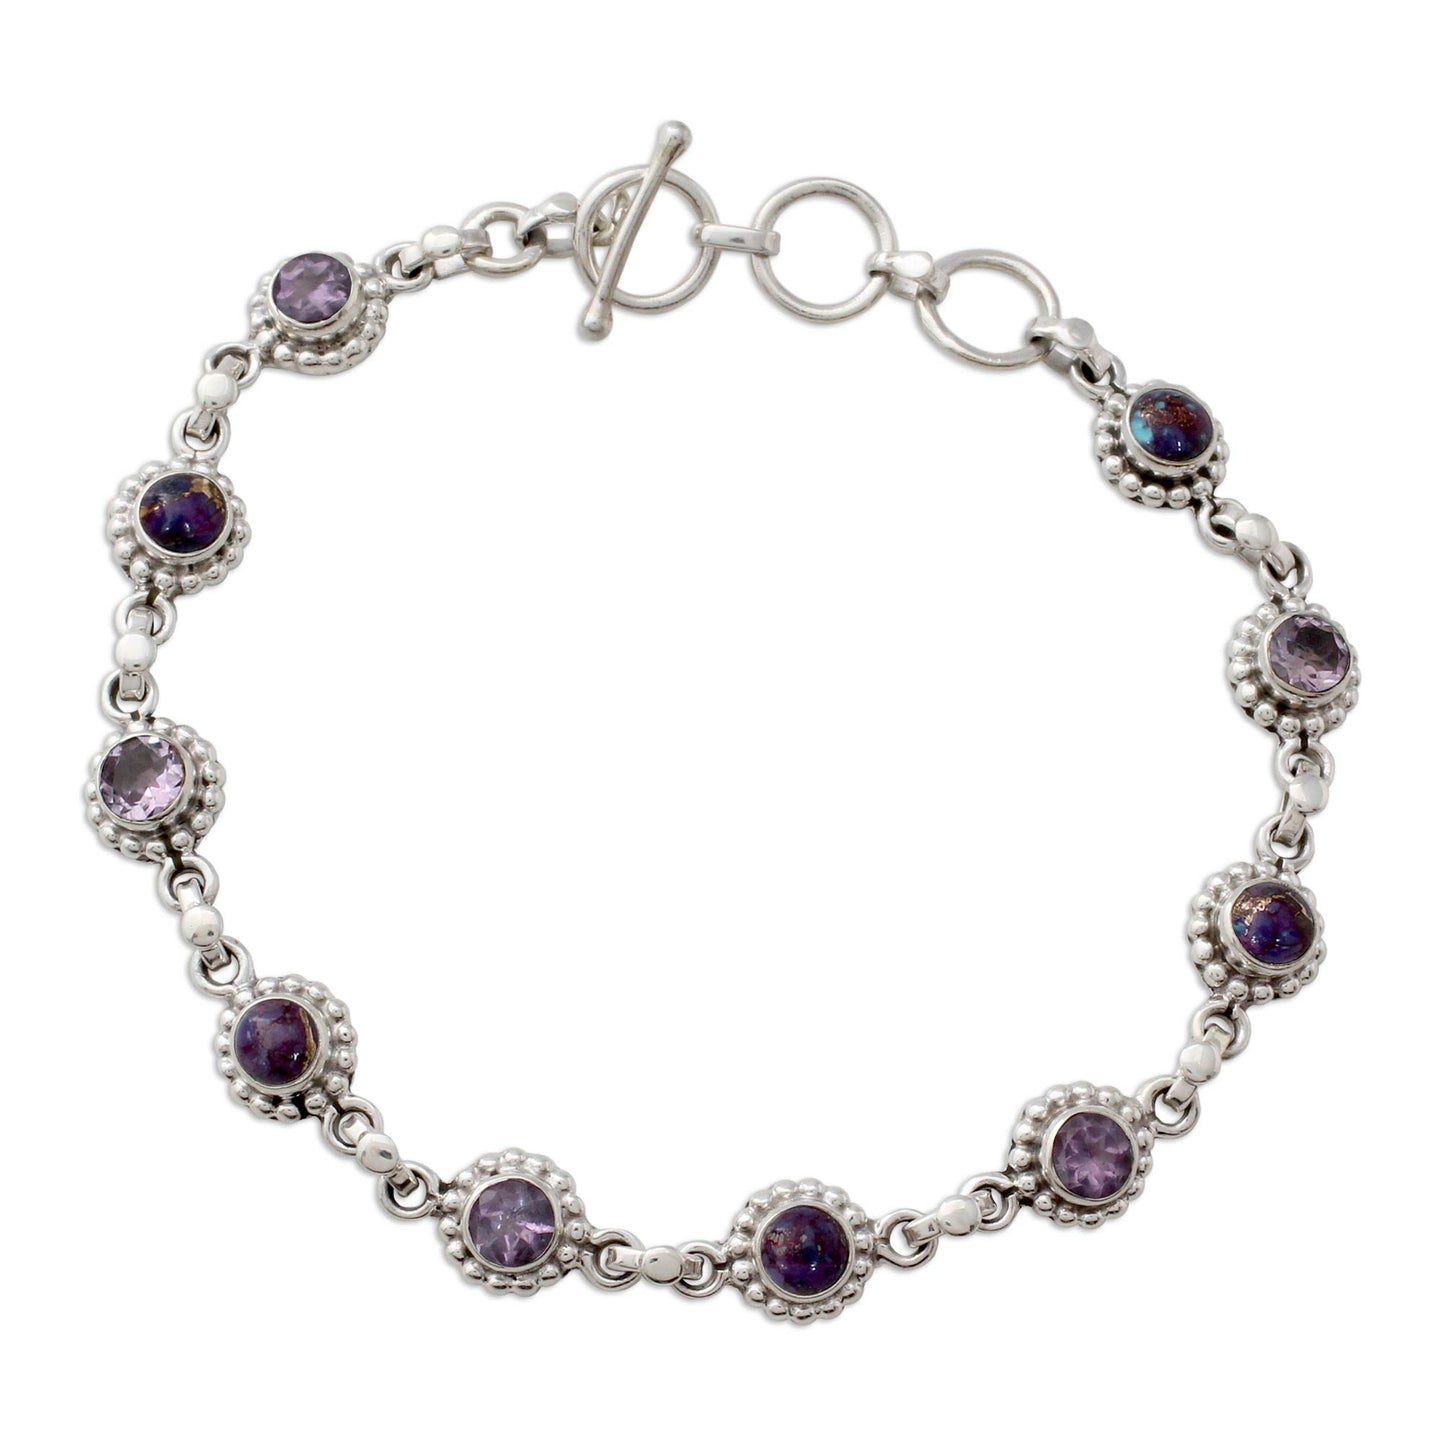 Petite Flowers Amethyst Sterling Silver and Composite Turquoise Bracelet